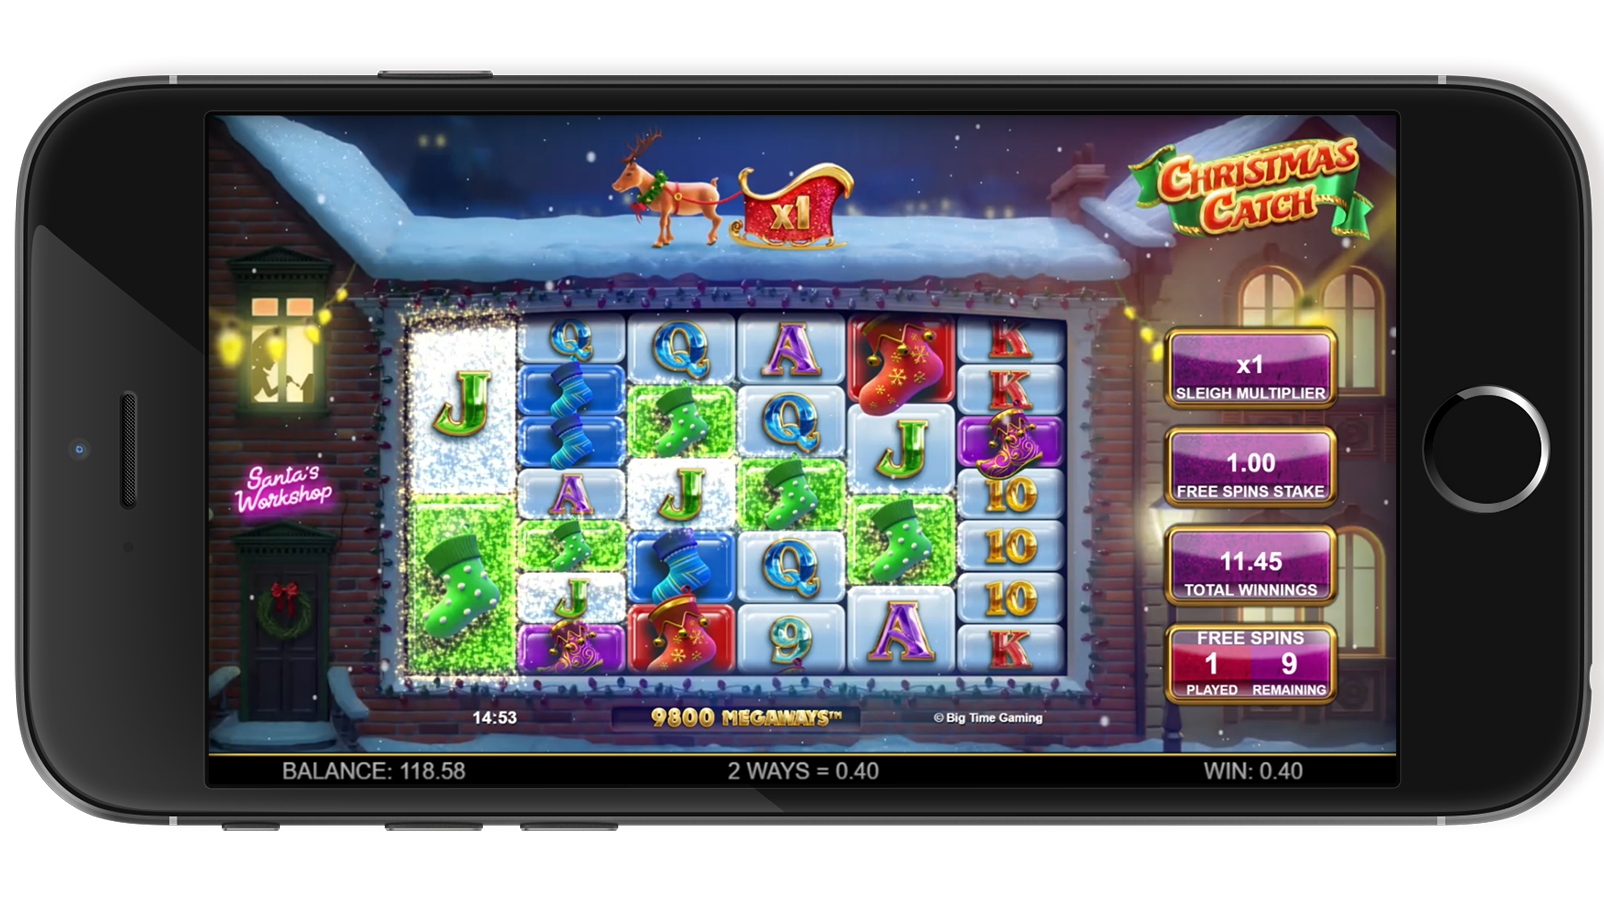 ChristmasCatch_FreeSpins_1_mobile.png